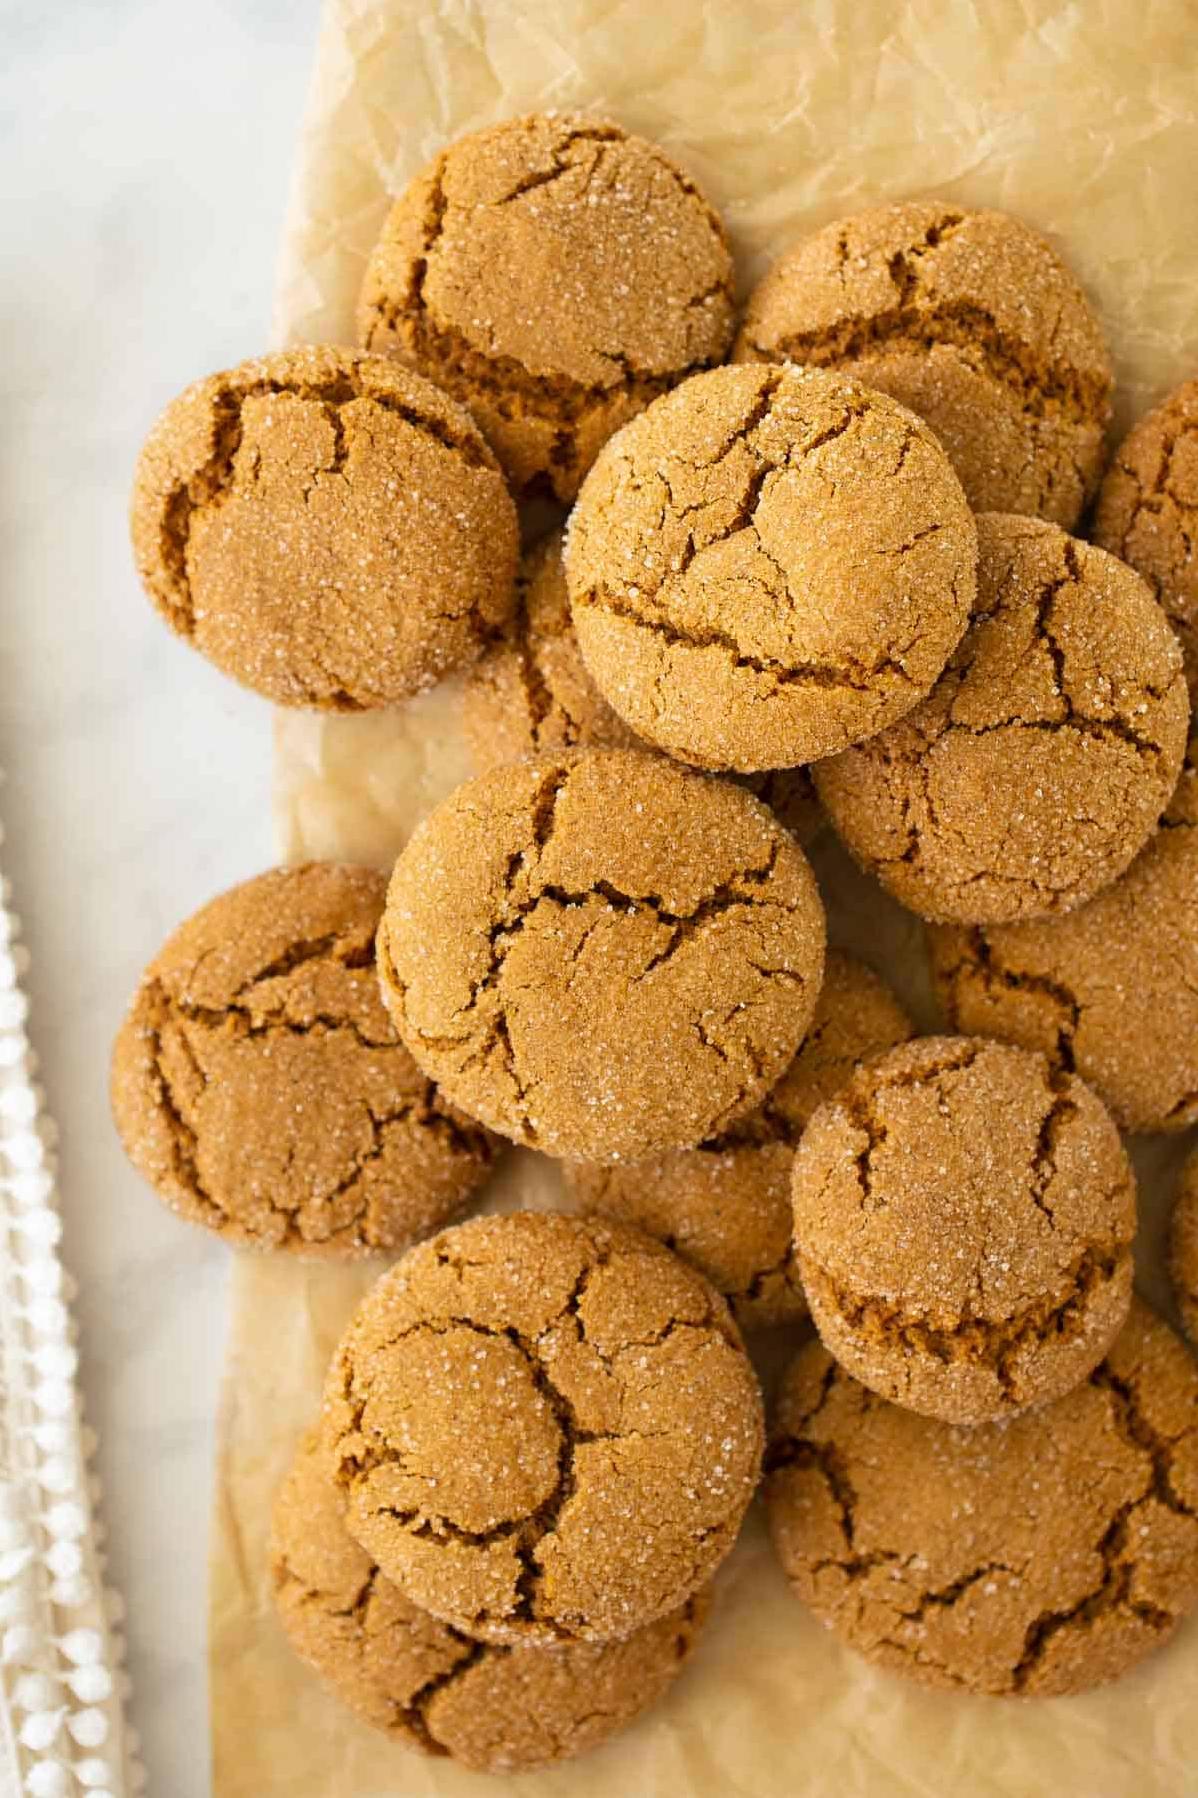  Satisfy your sweet tooth with these dairy-free and gluten-free molasses crinkles!